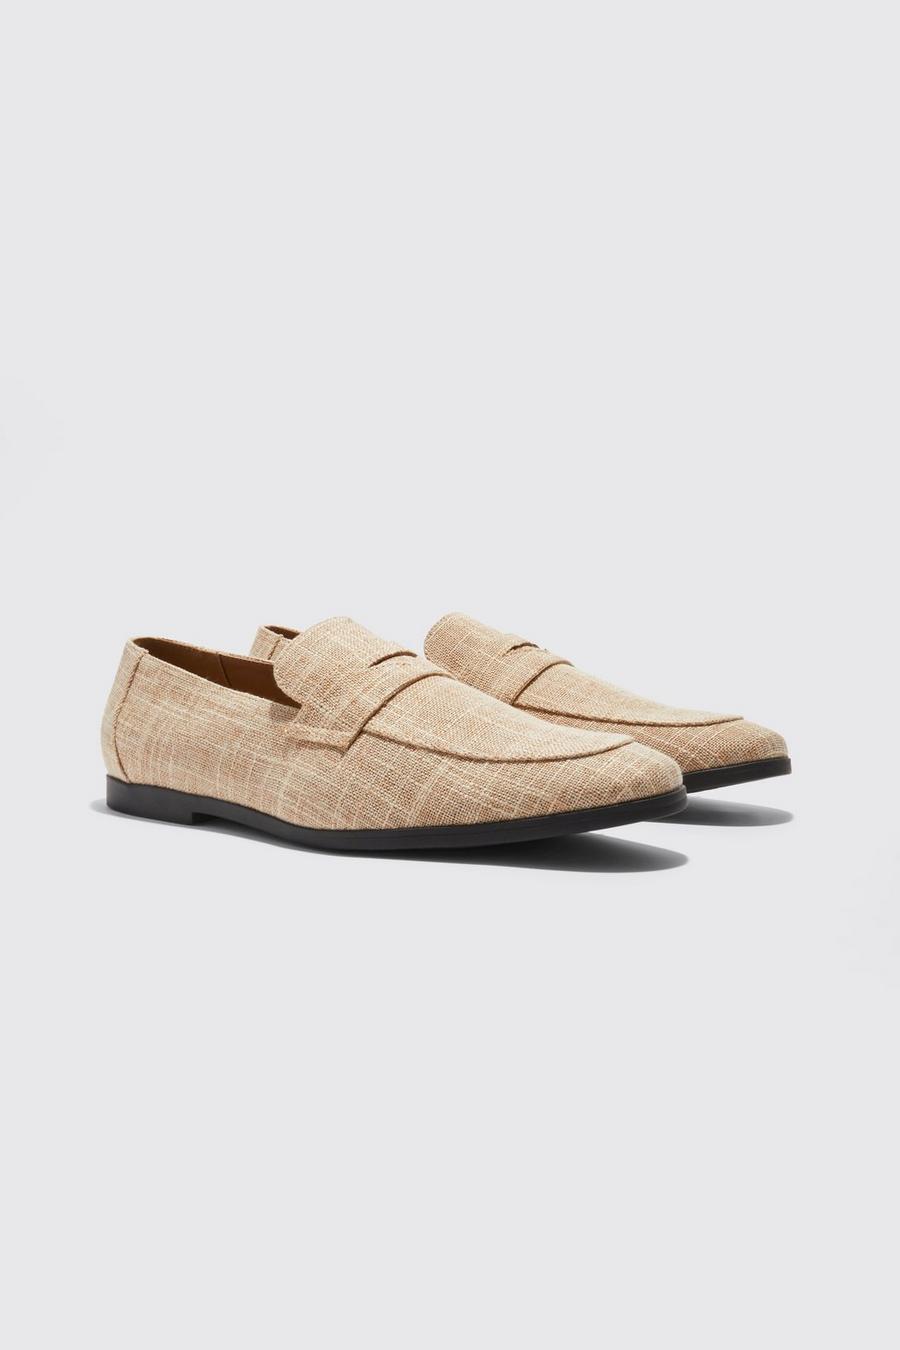 Stone beis Linen Loafer